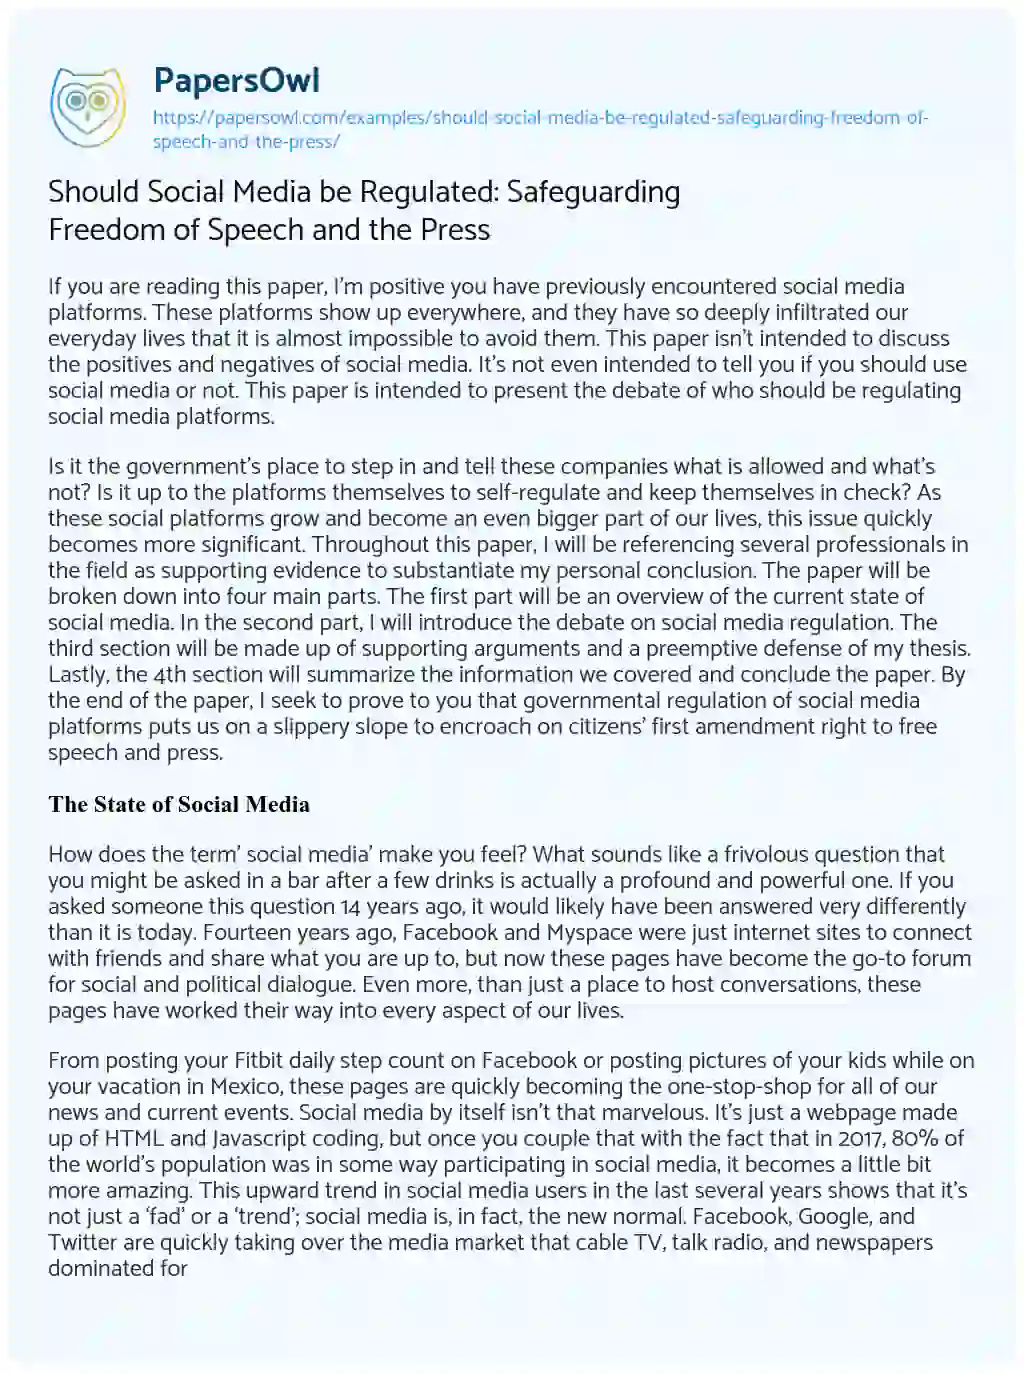 Essay on Should Social Media be Regulated: Safeguarding Freedom of Speech and the Press